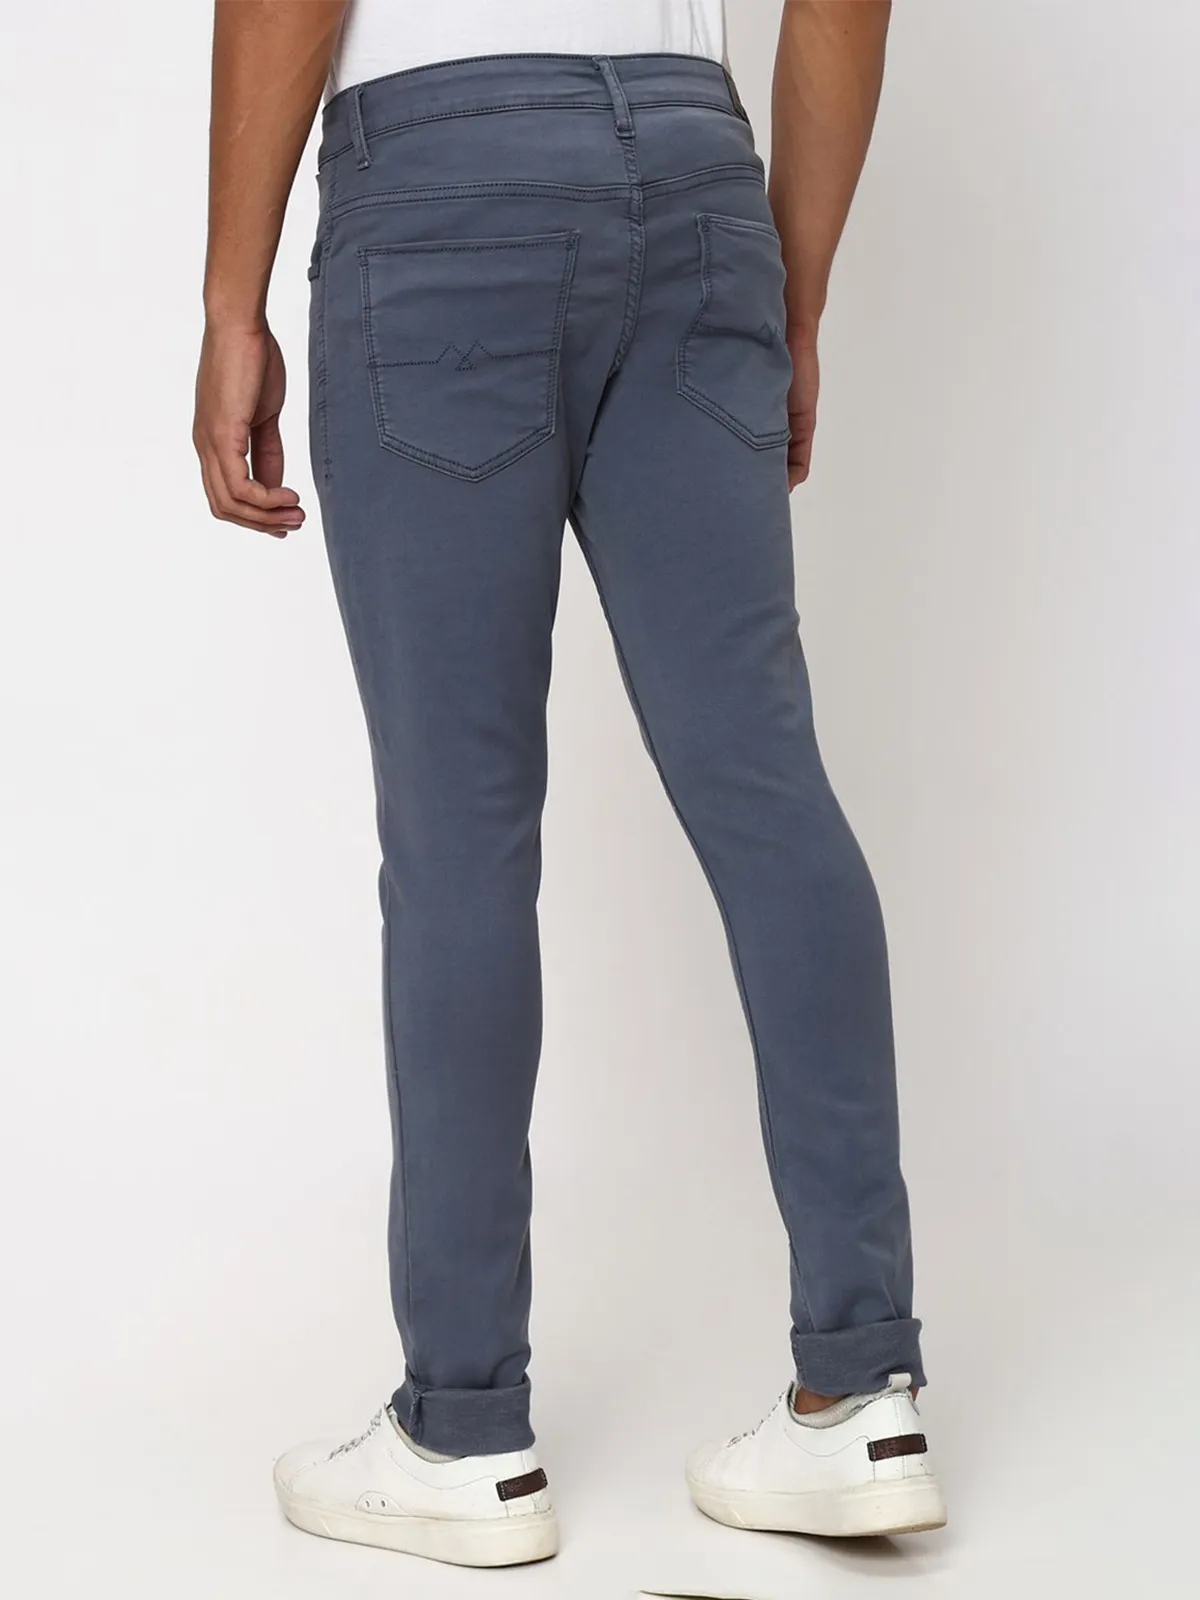 Mufti grey solid skinny fit cotton trouser